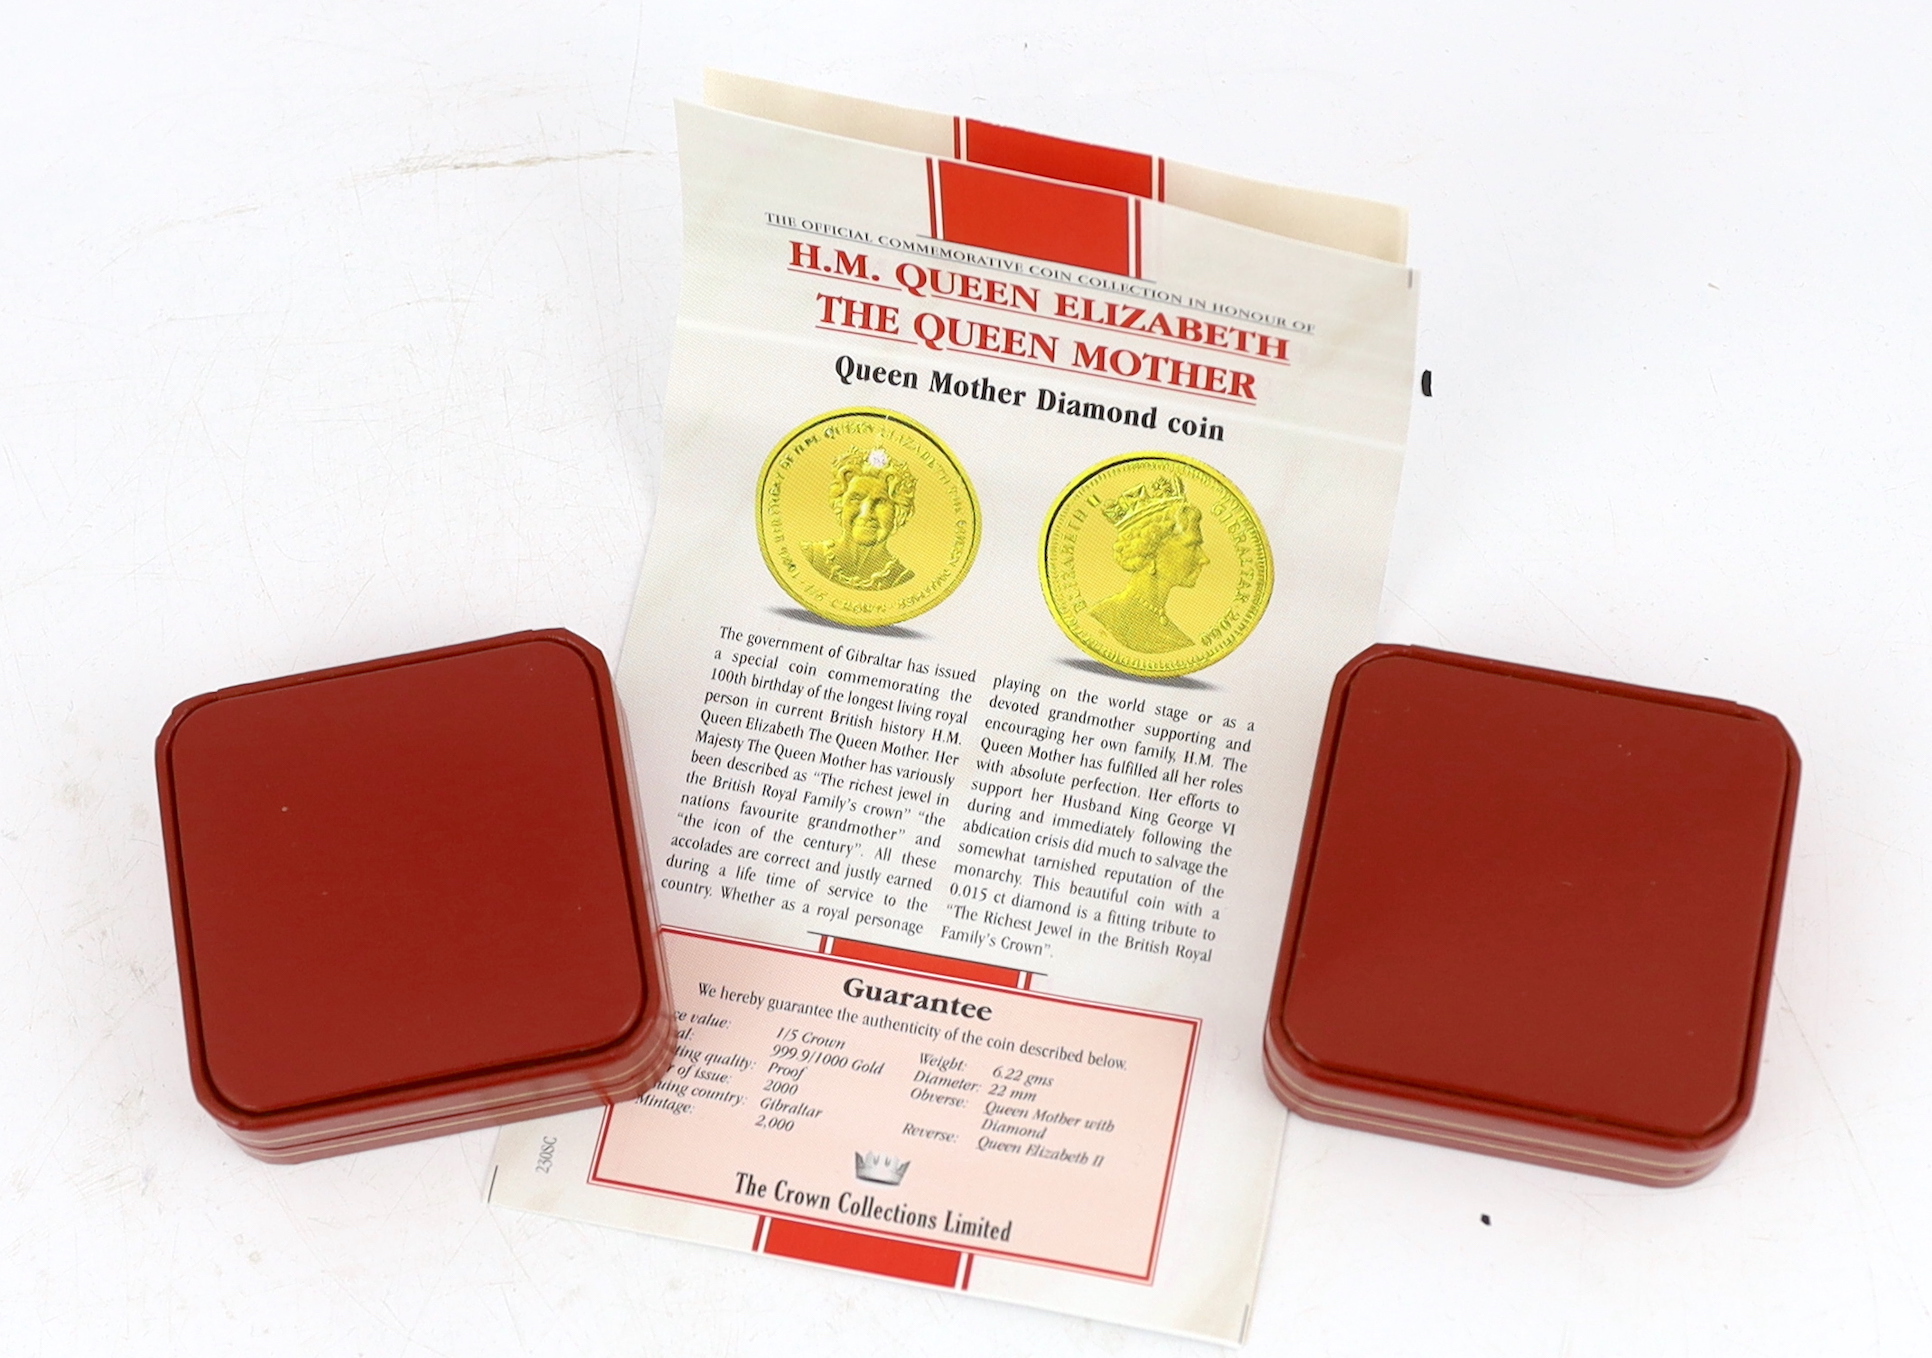 Gold coins - Two Pobjoy mint Isle of Man proof gold 1/5 crown coins, each 6.22g, 999.9/1000 purity - Image 5 of 5